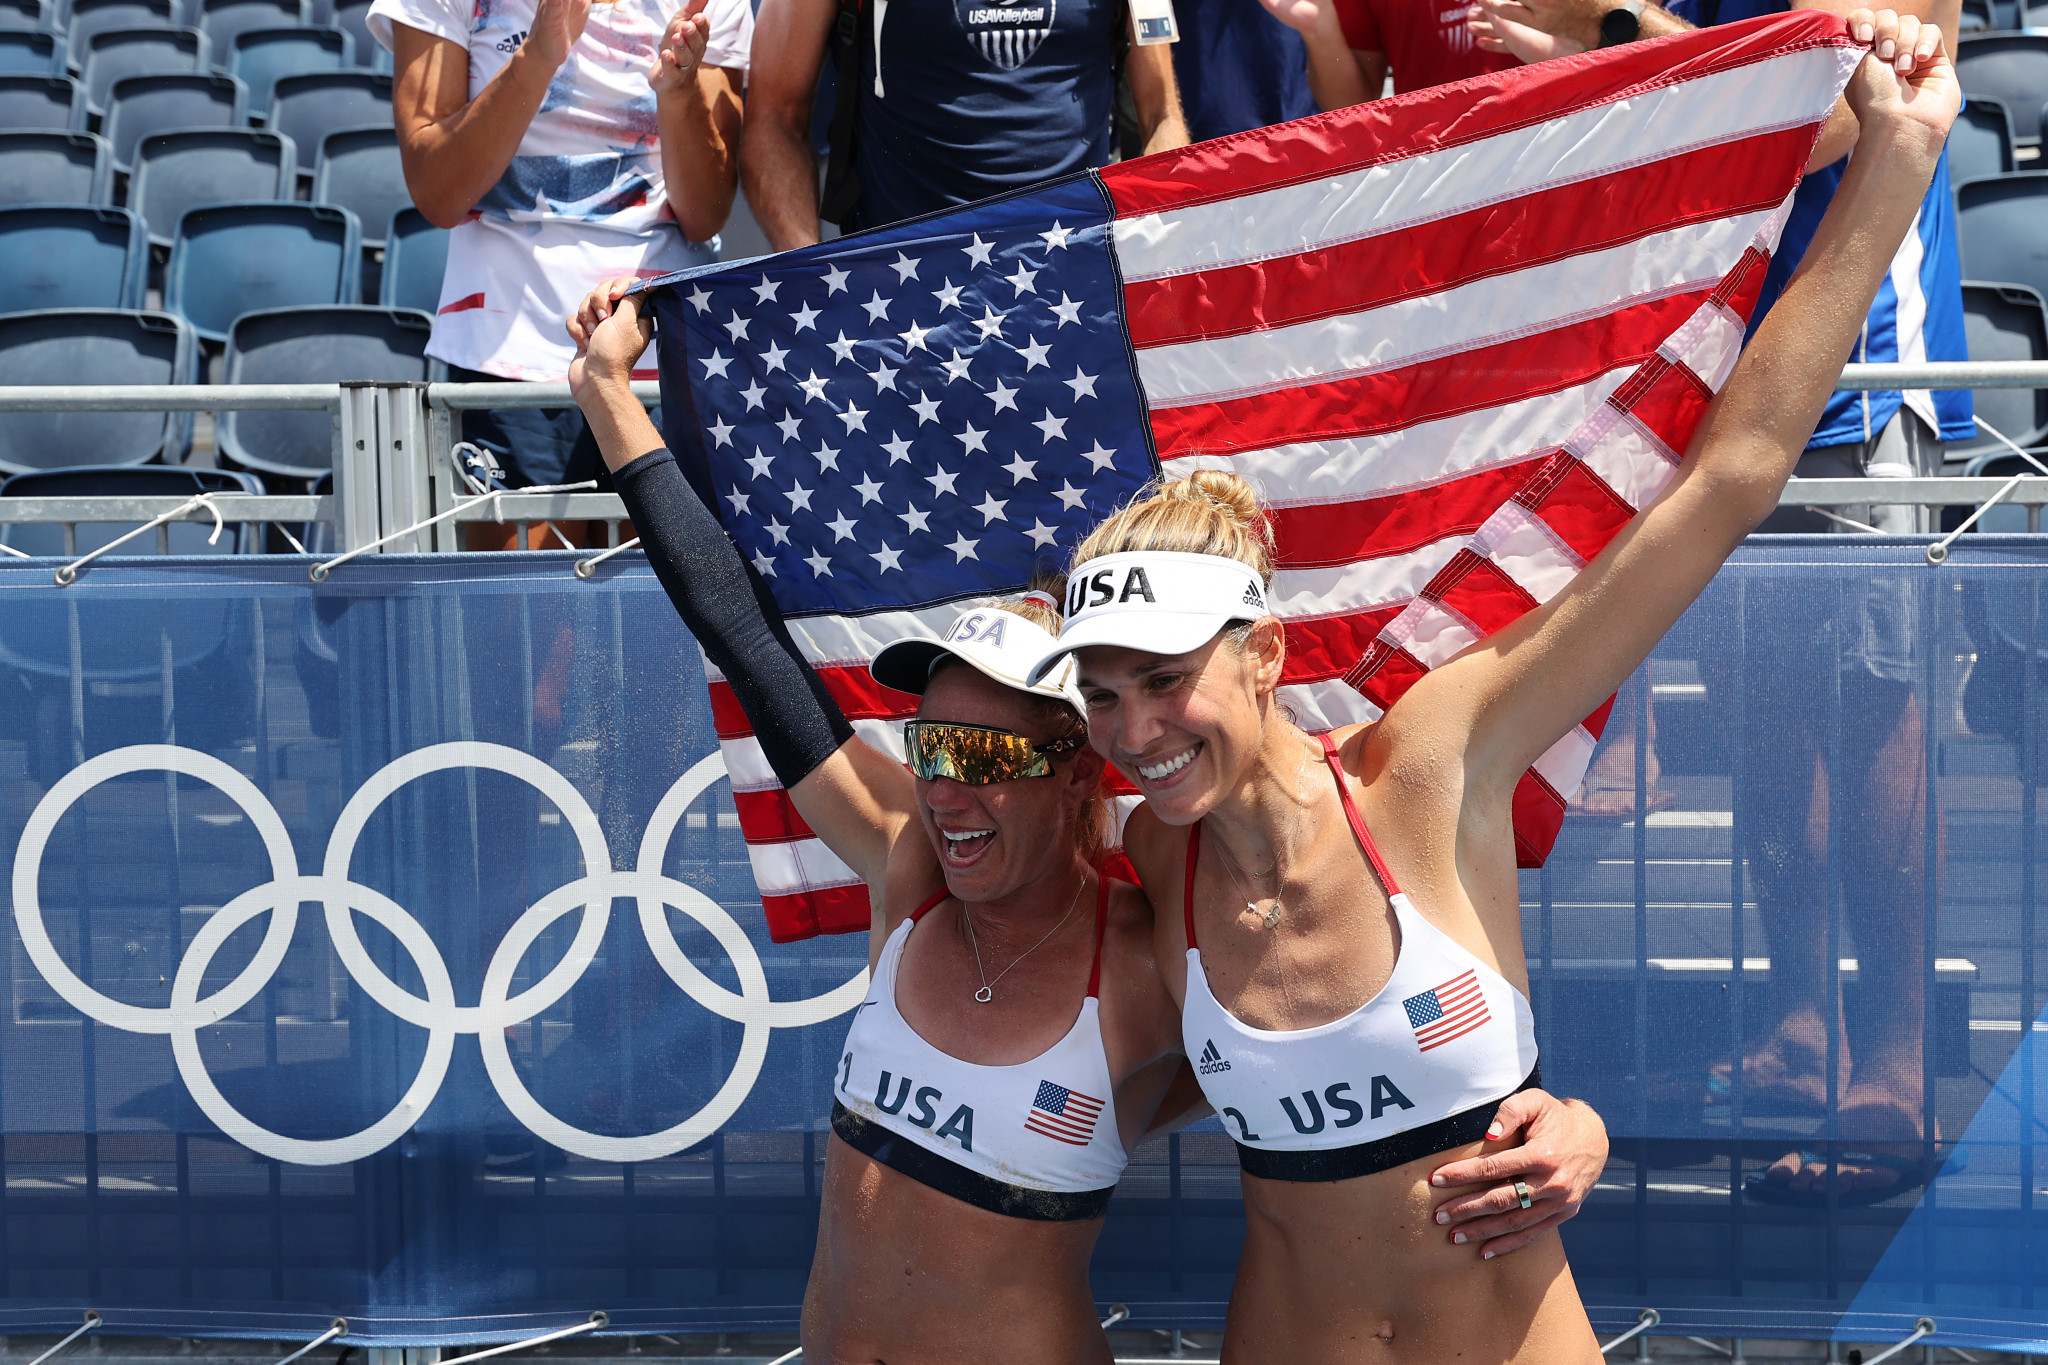 Ross and Klineman handle searing heat to win Olympic beach volleyball gold